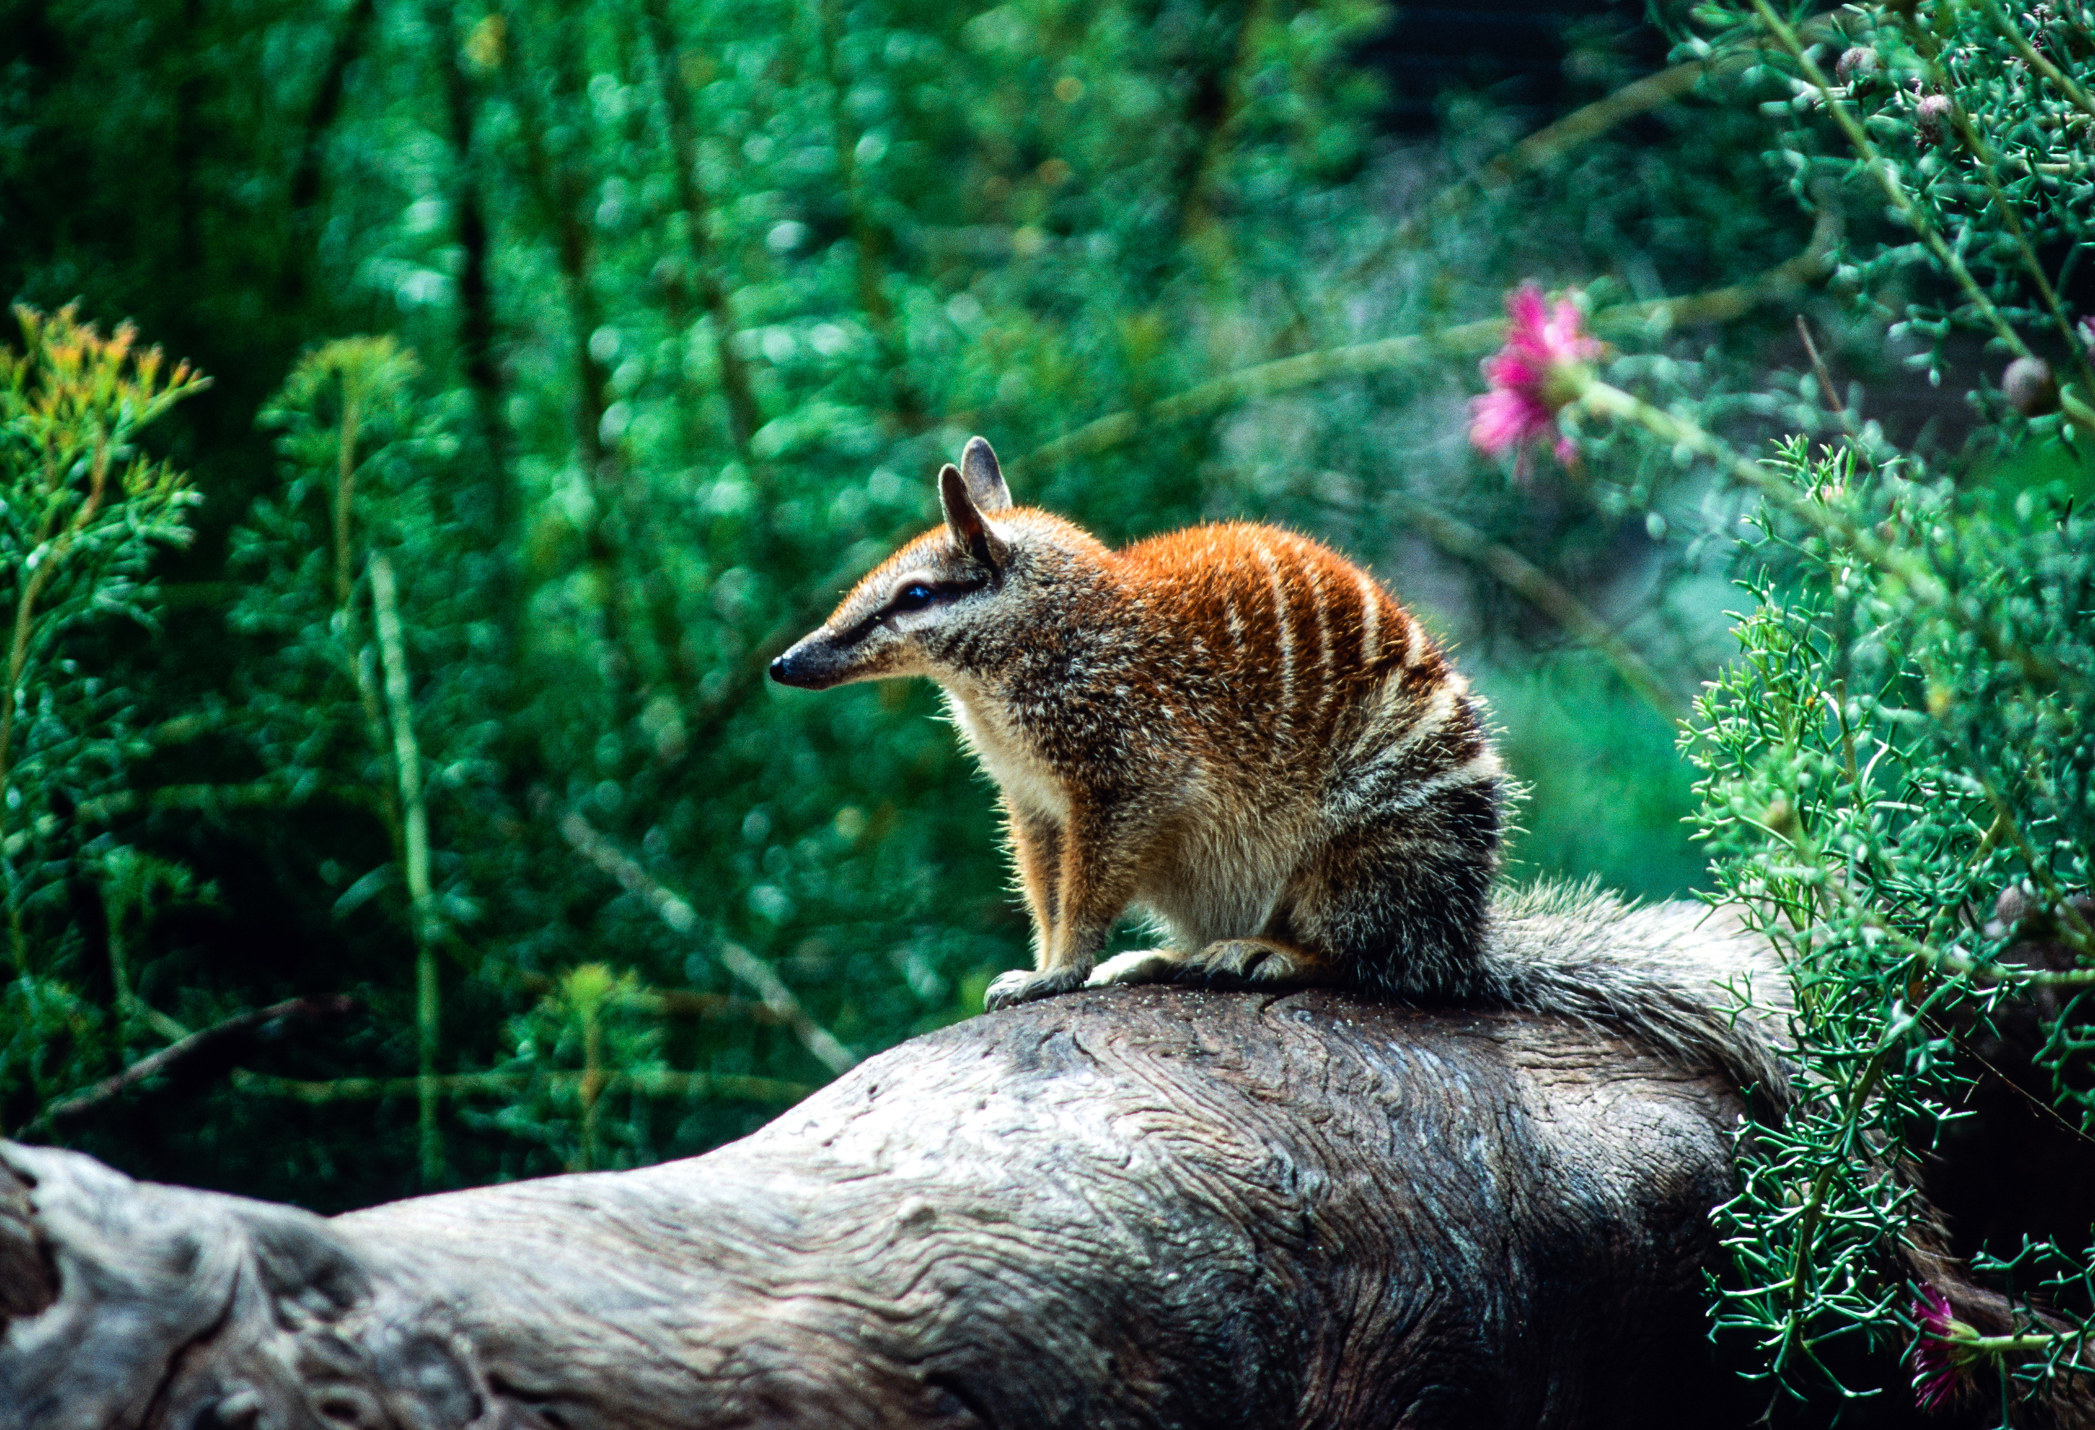 numbat on a rock